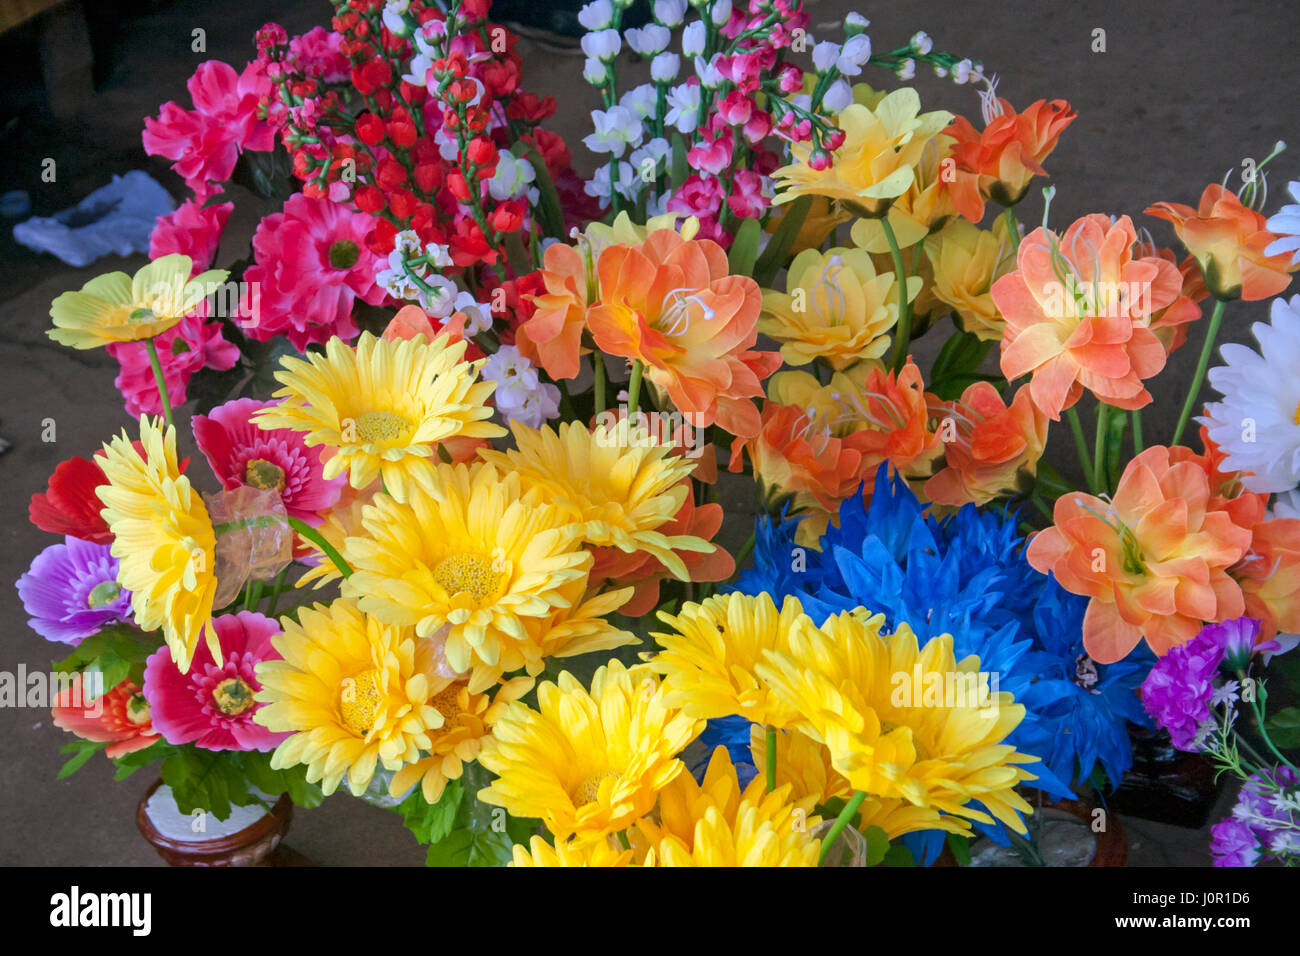 Fake Flowers Stock Photos - 65,406 Images